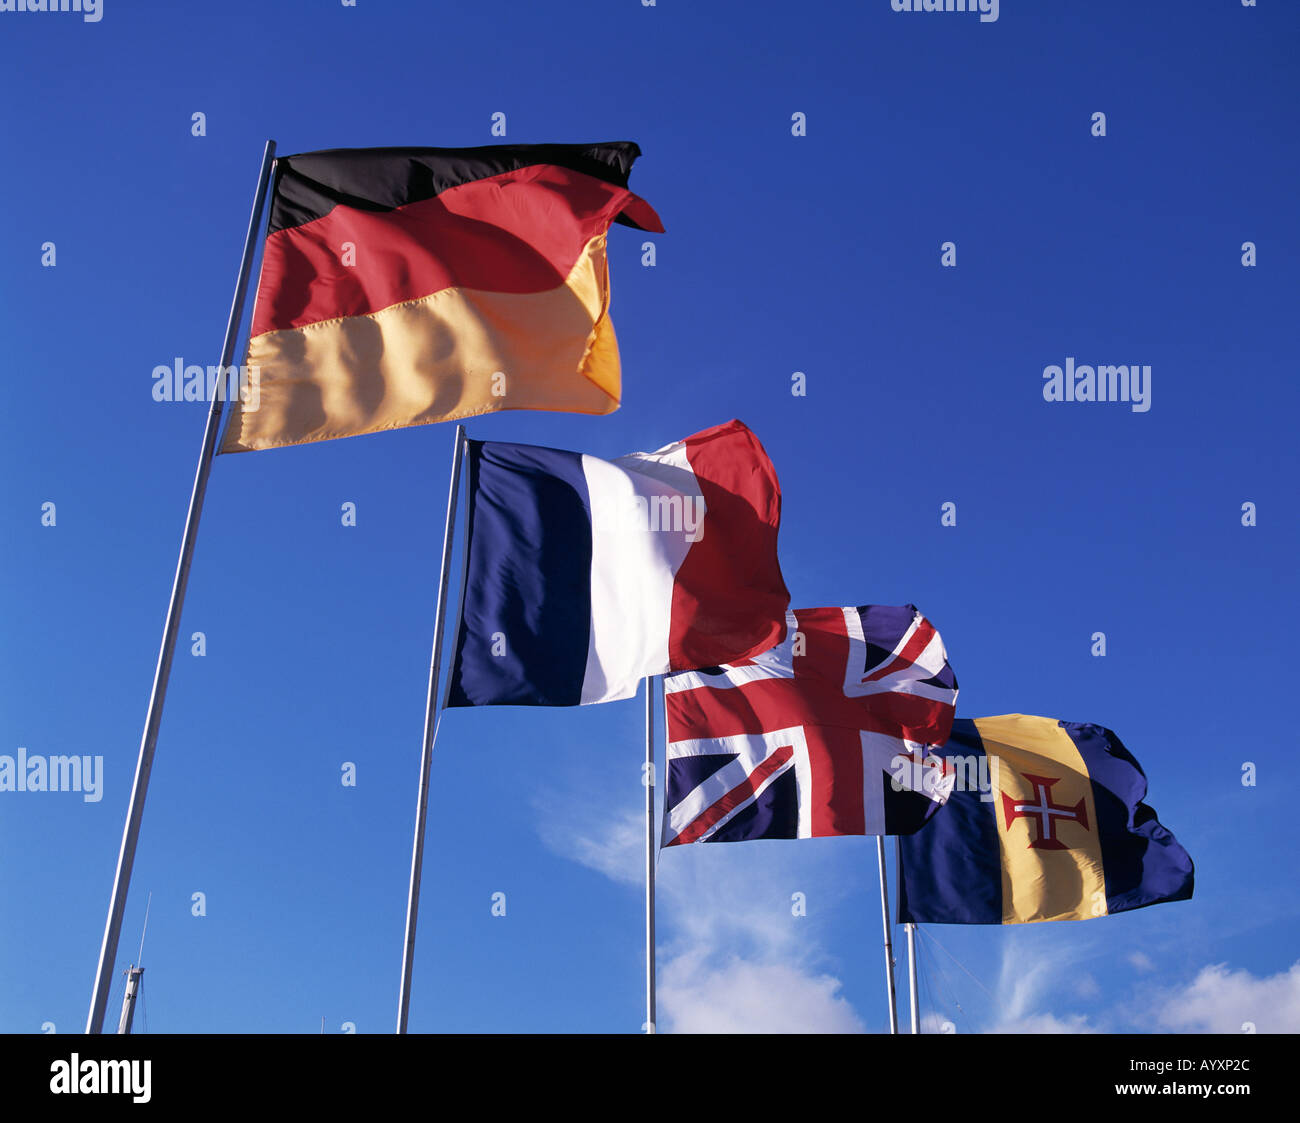 international flags, flags of different nations, German flag, flag of the Federal Republic of Germany, flag of France, French flag, flag of Great Britain, British flag, England, English flag, flag of Malta, Maltesian flag, flagpoles, blue sky, Stock Photo